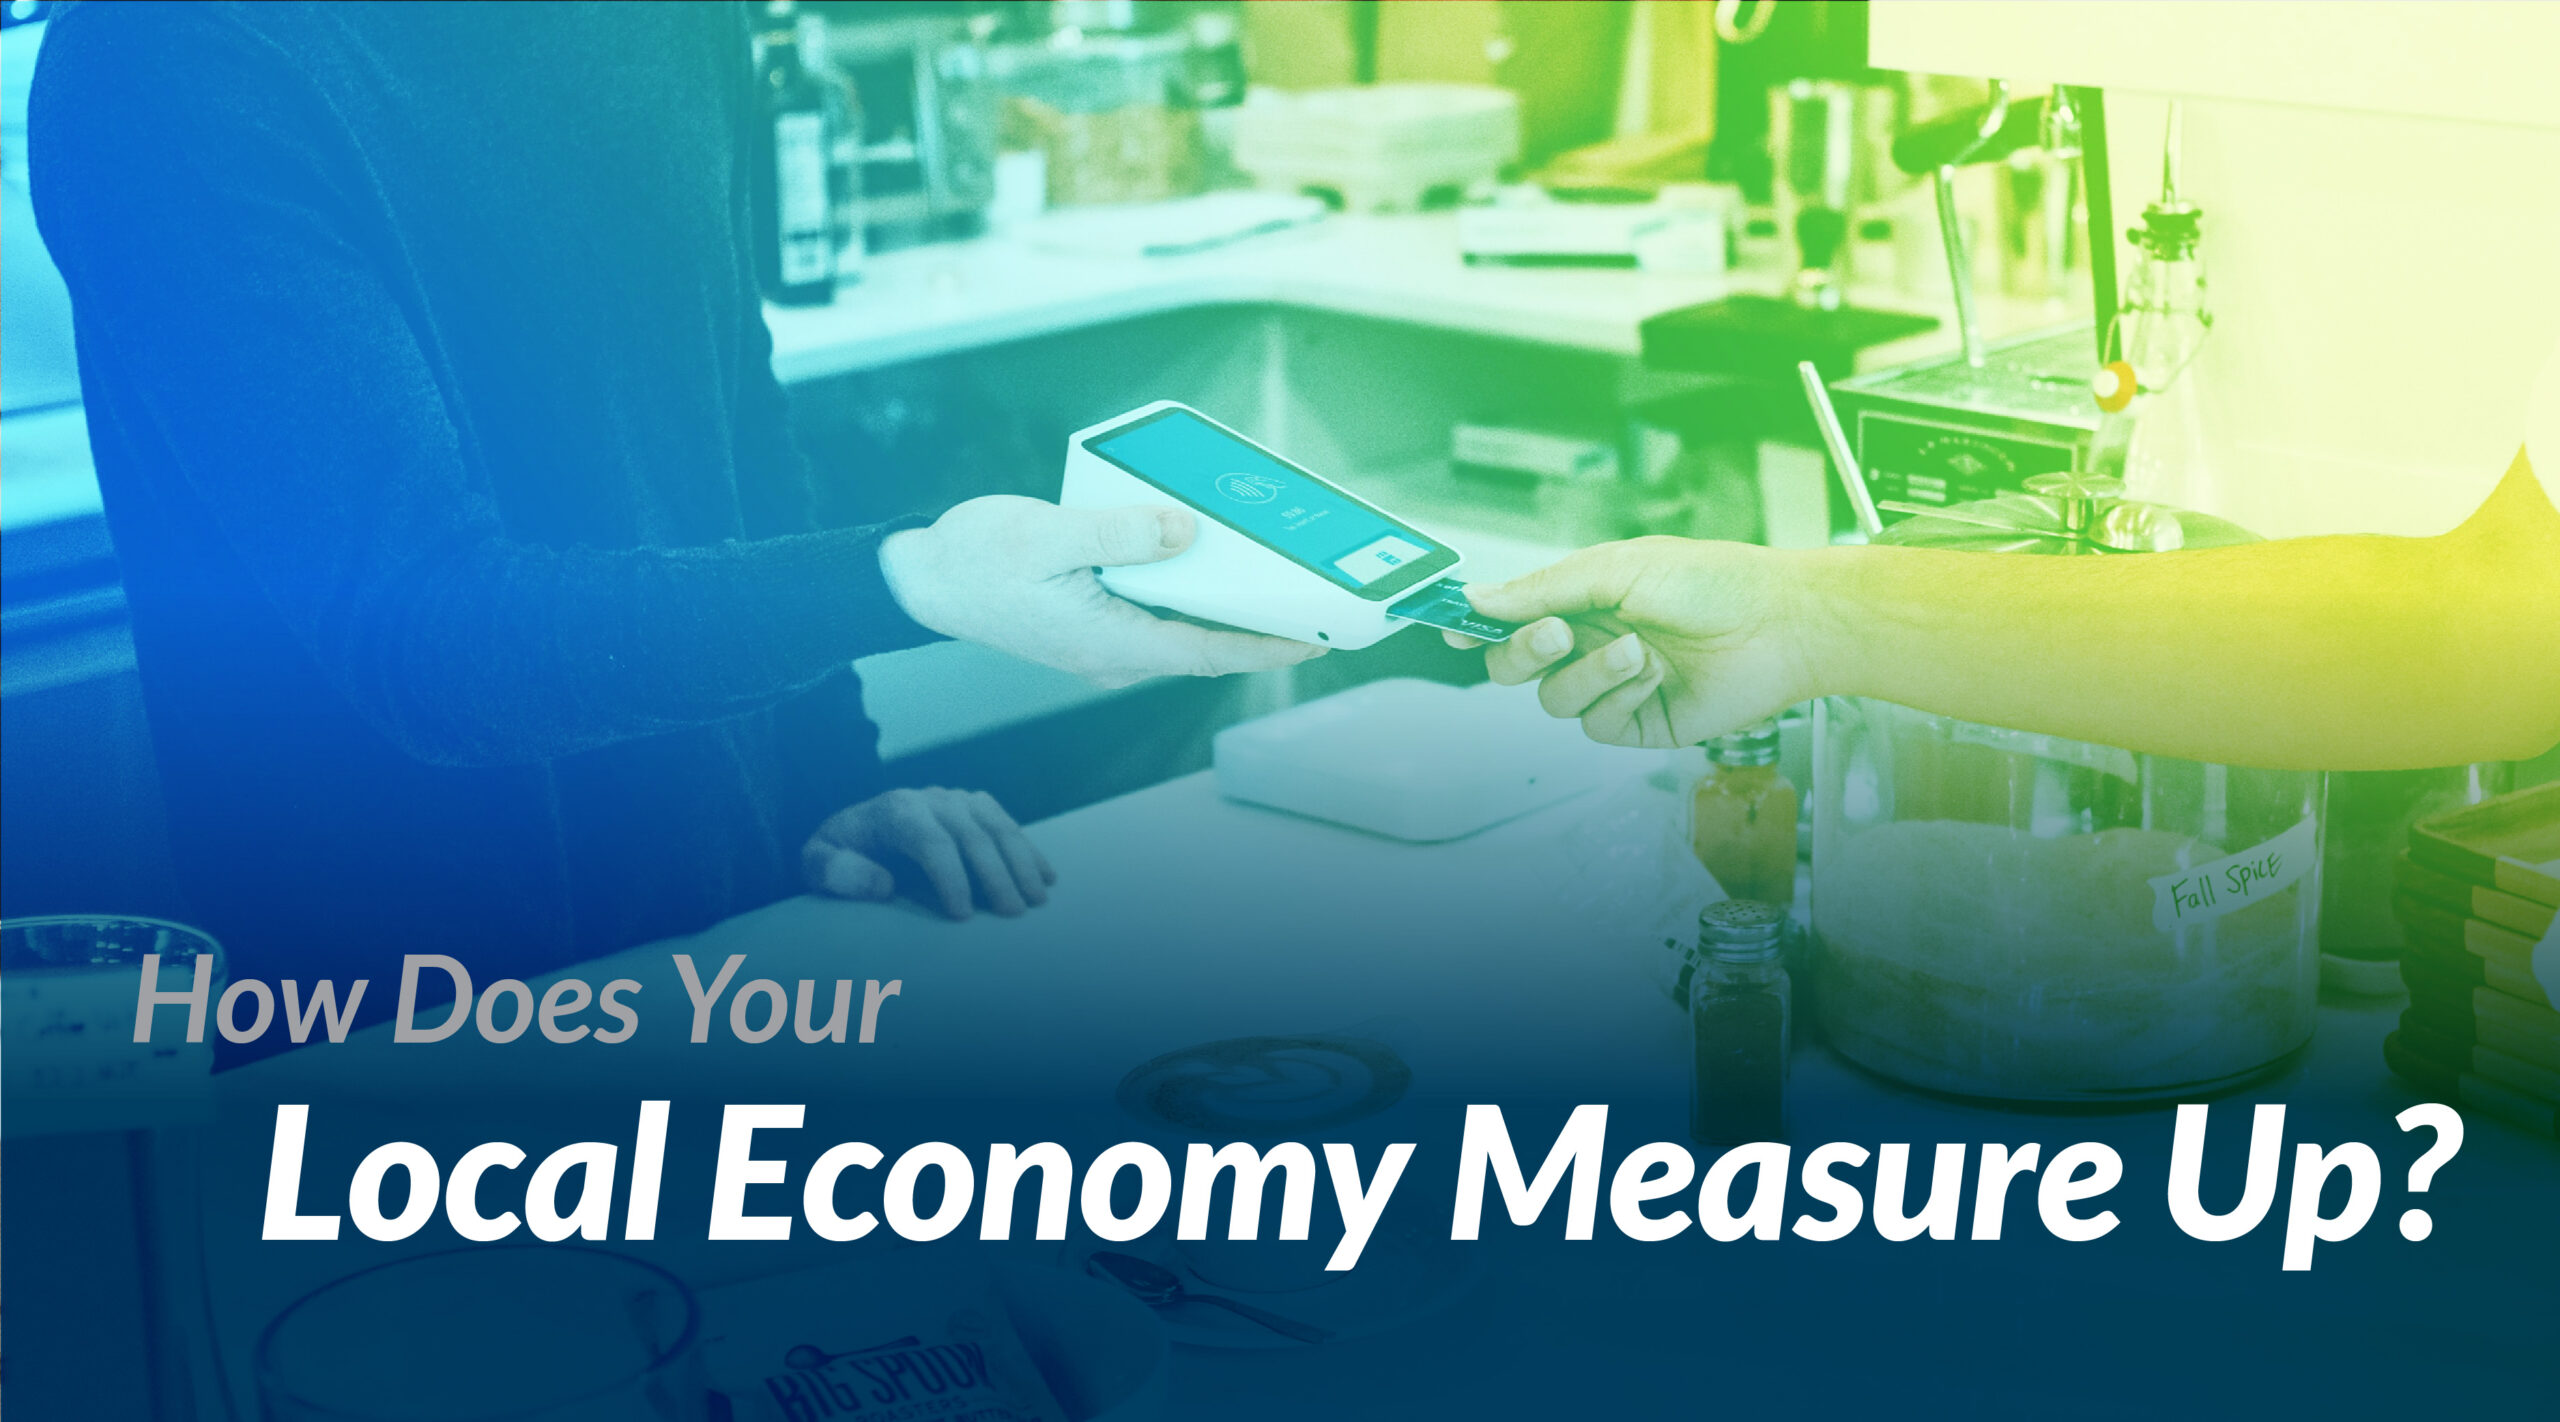 How does your local economy measure up?